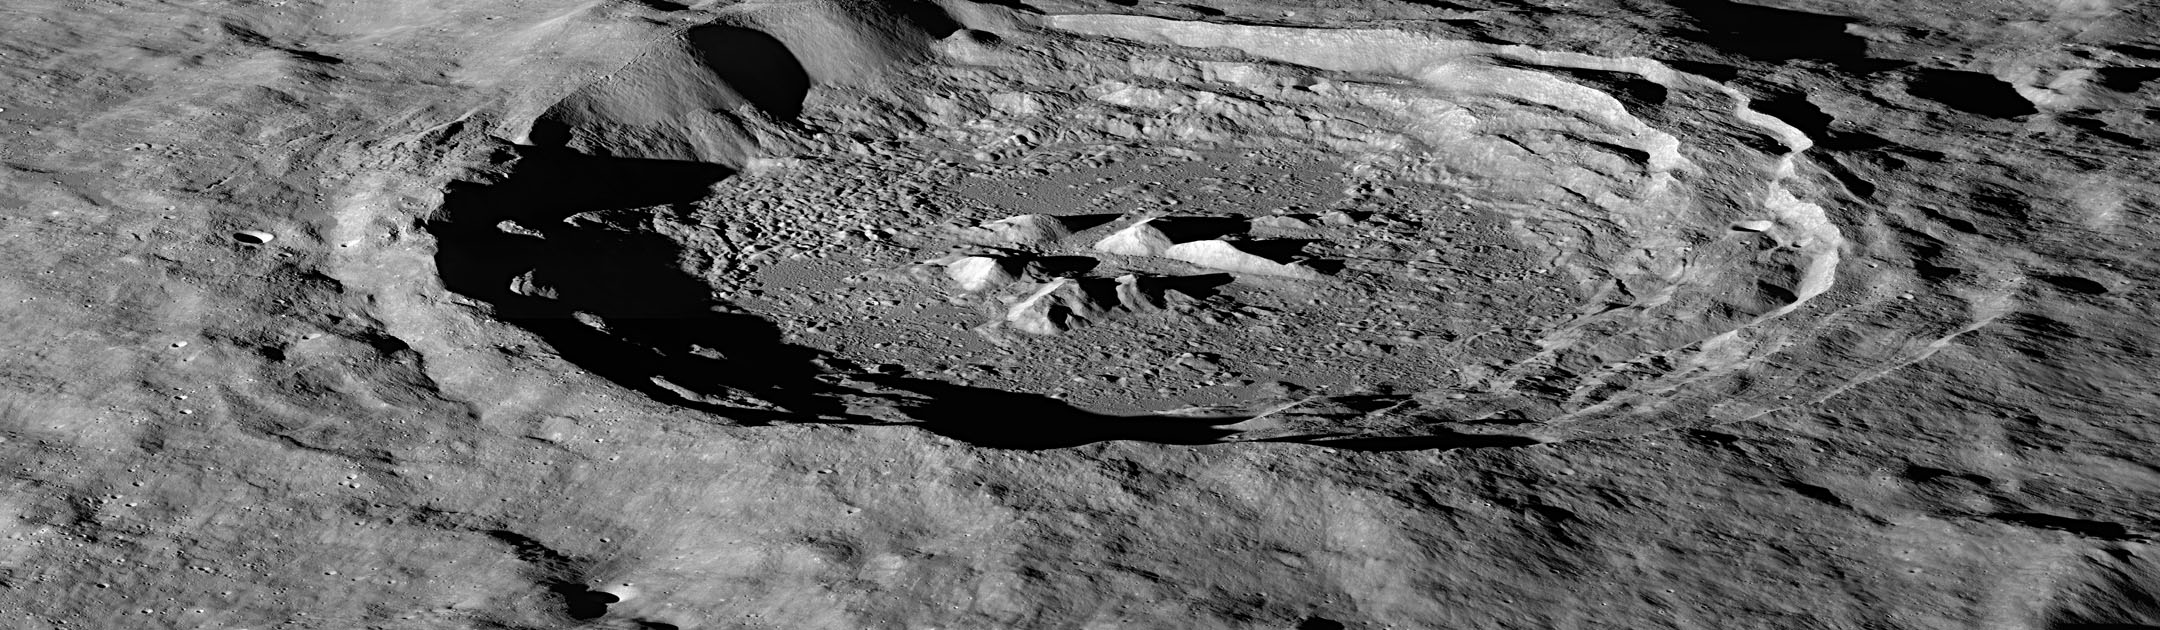 The Moon's Hayn crater as seen from NASA's LRO spacecraft.